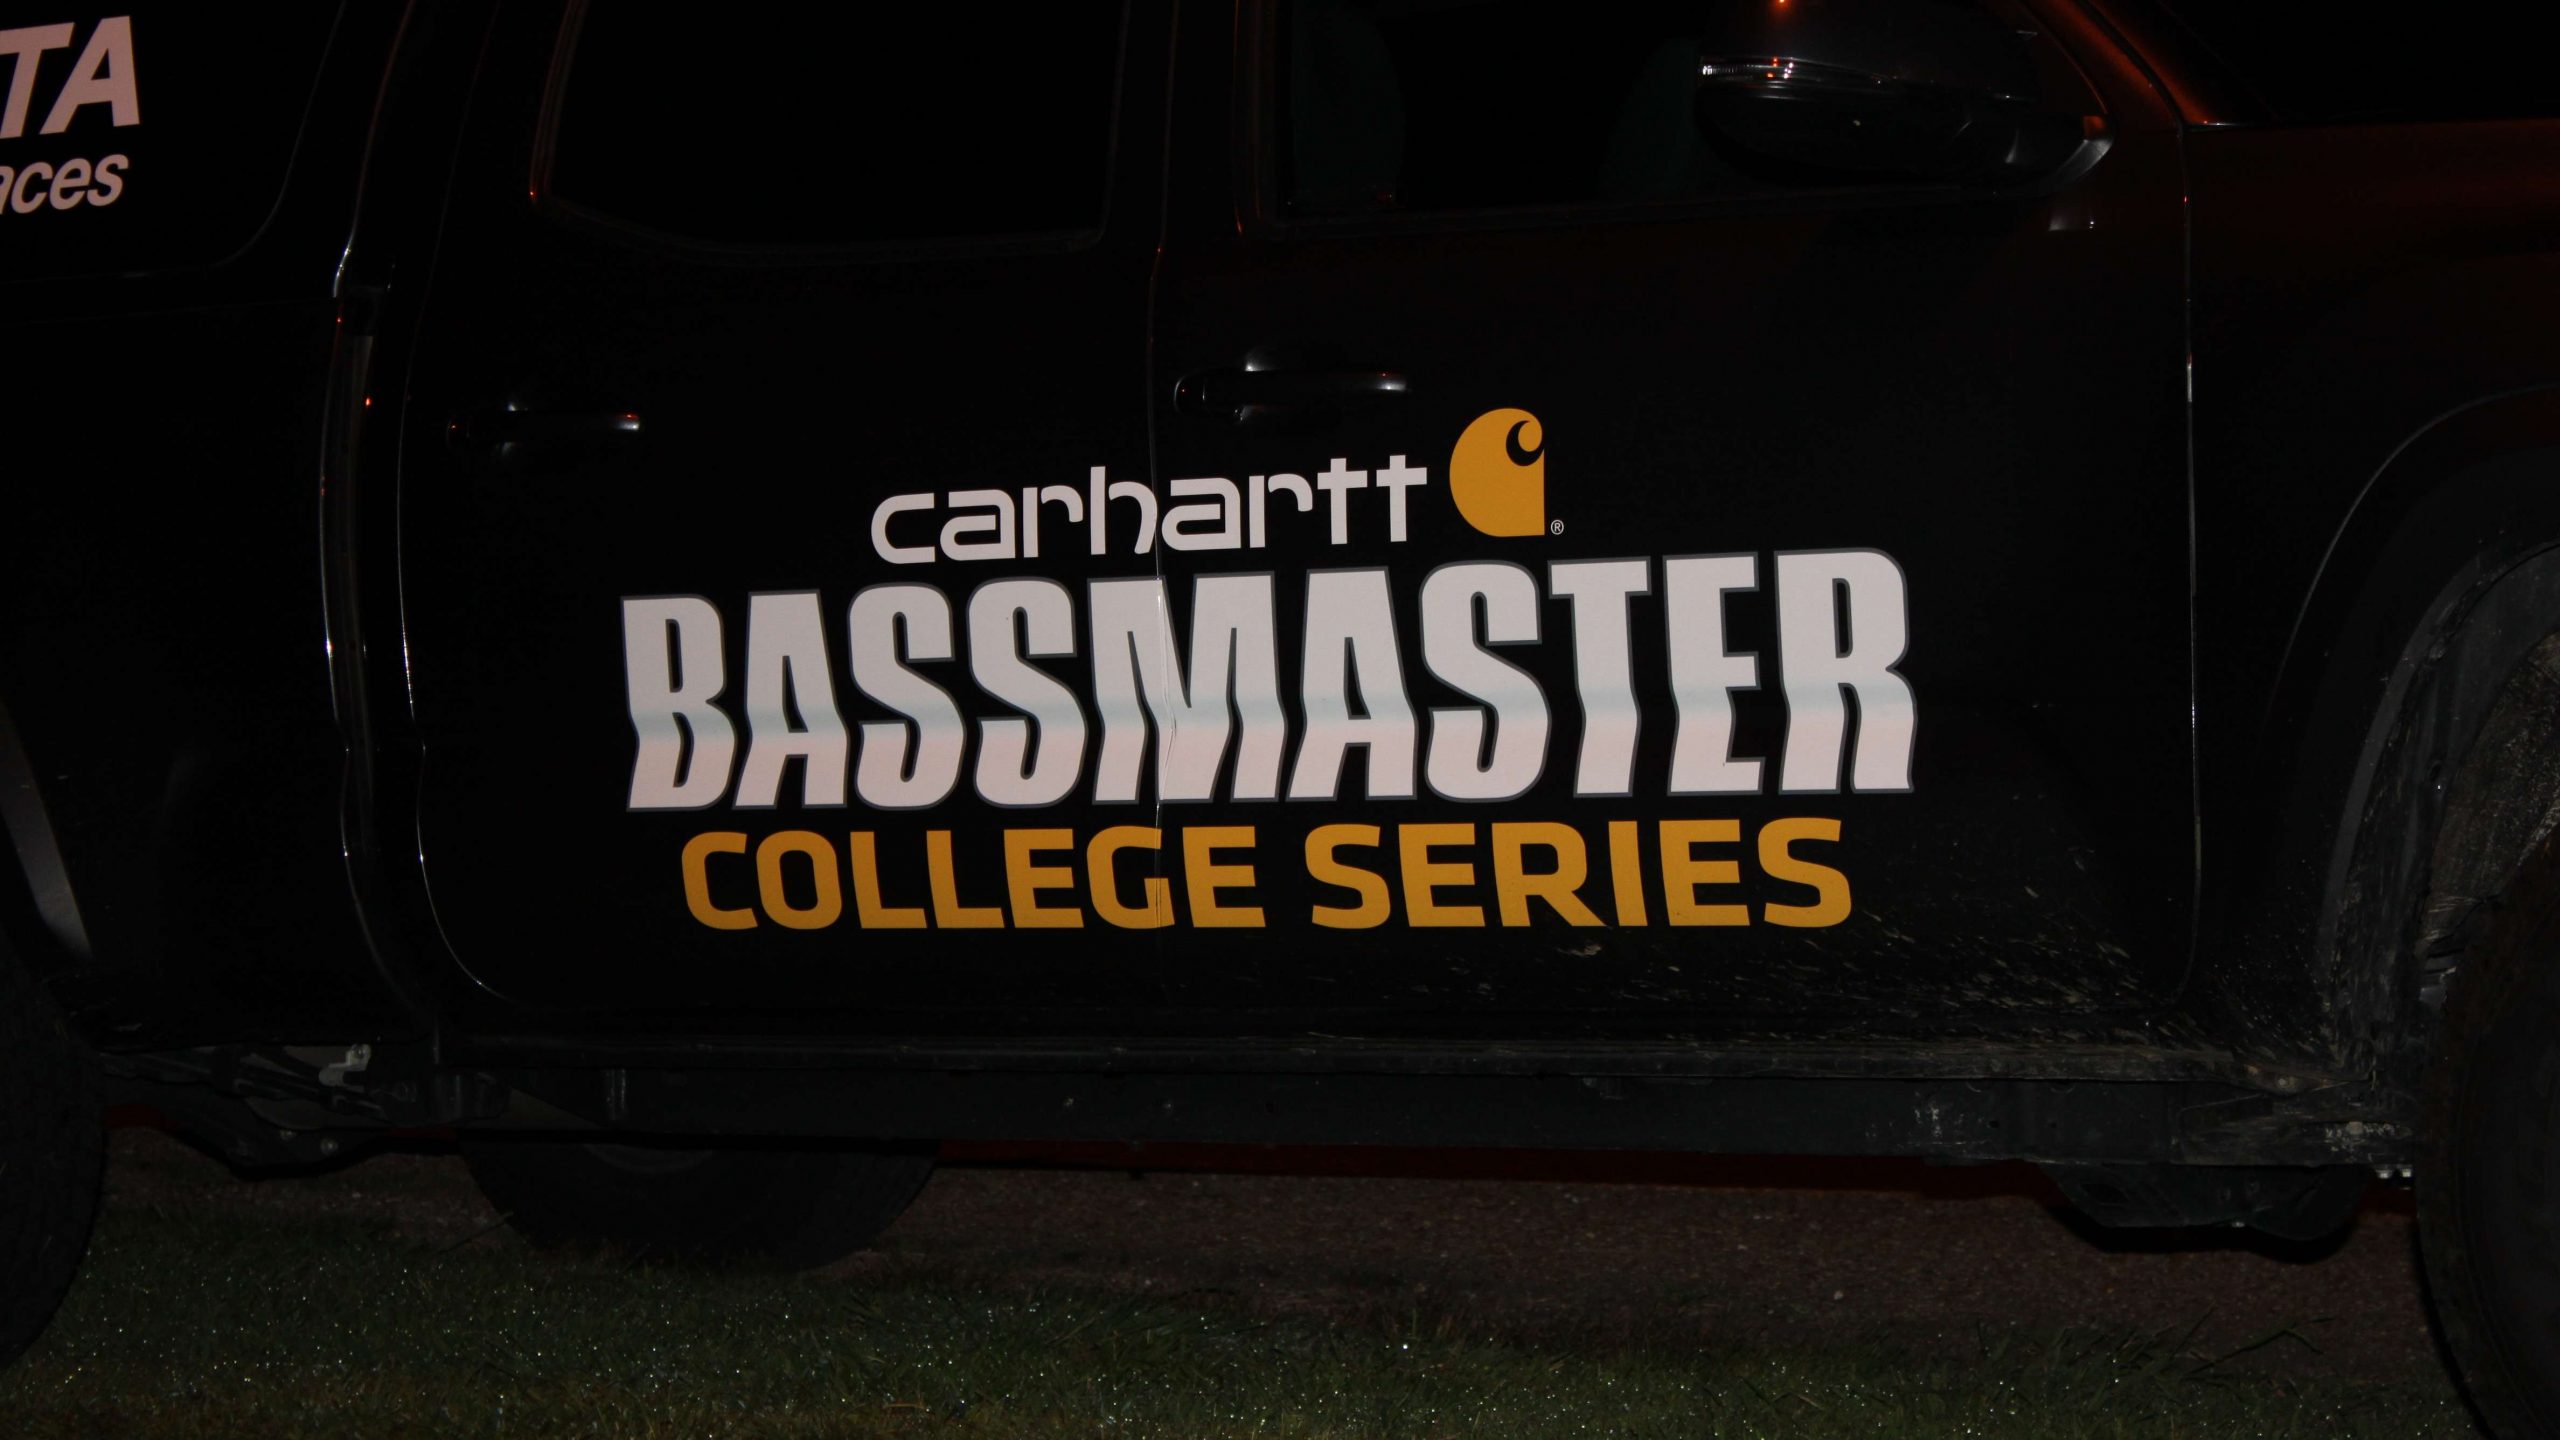 The side of this truck says it all - itâs the final day of the Carhartt Bassmaster College Series Classic Bracket presented by Bass Pro Shops.